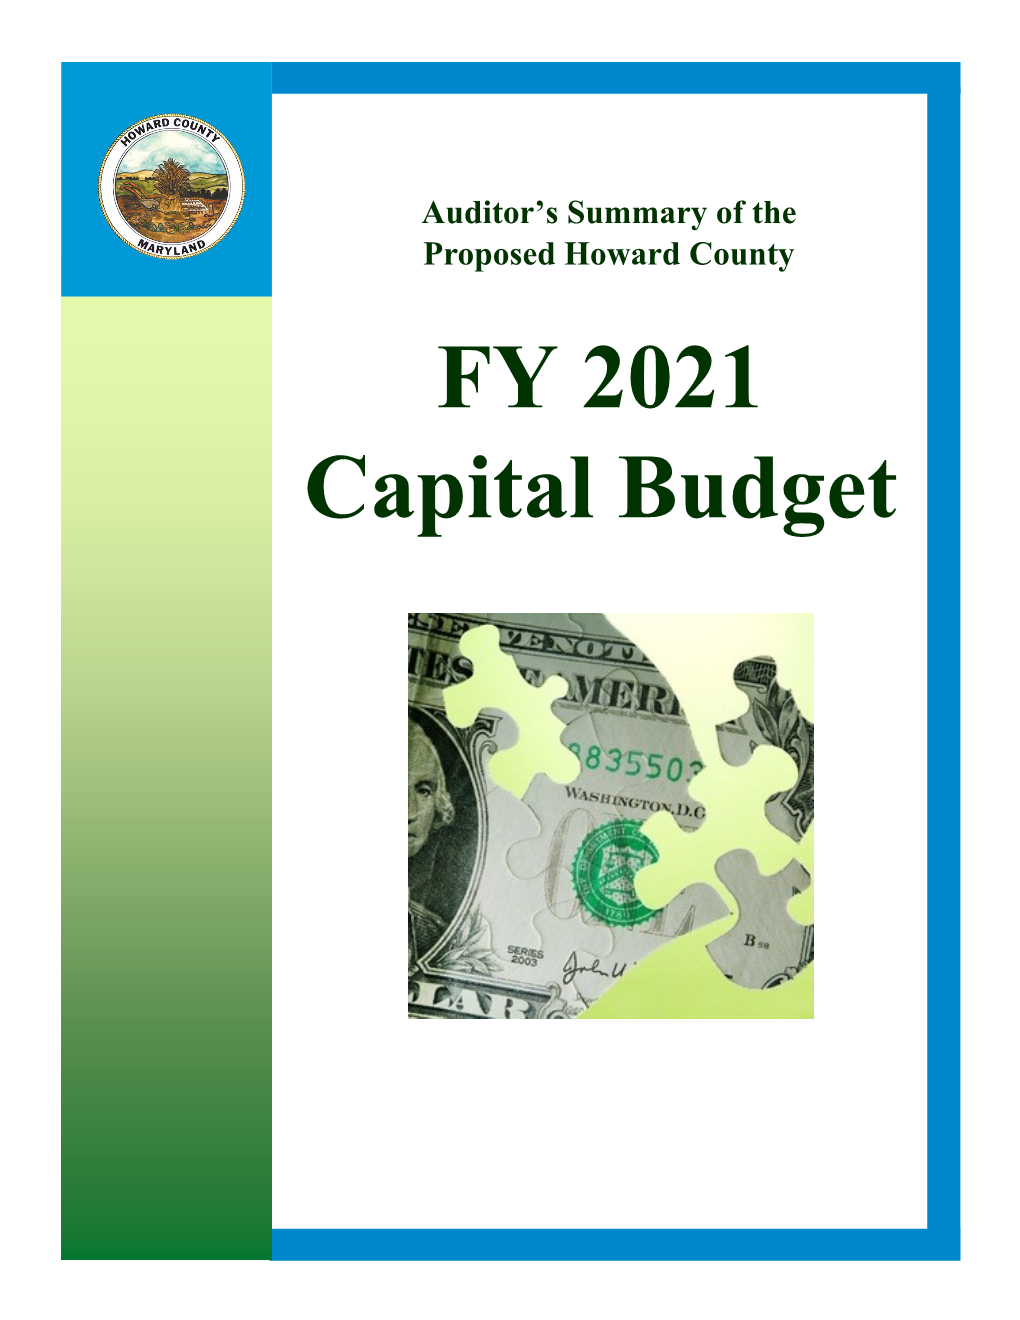 FY 2021 Capital Budget OFFICE of the COUNTY AUDITOR